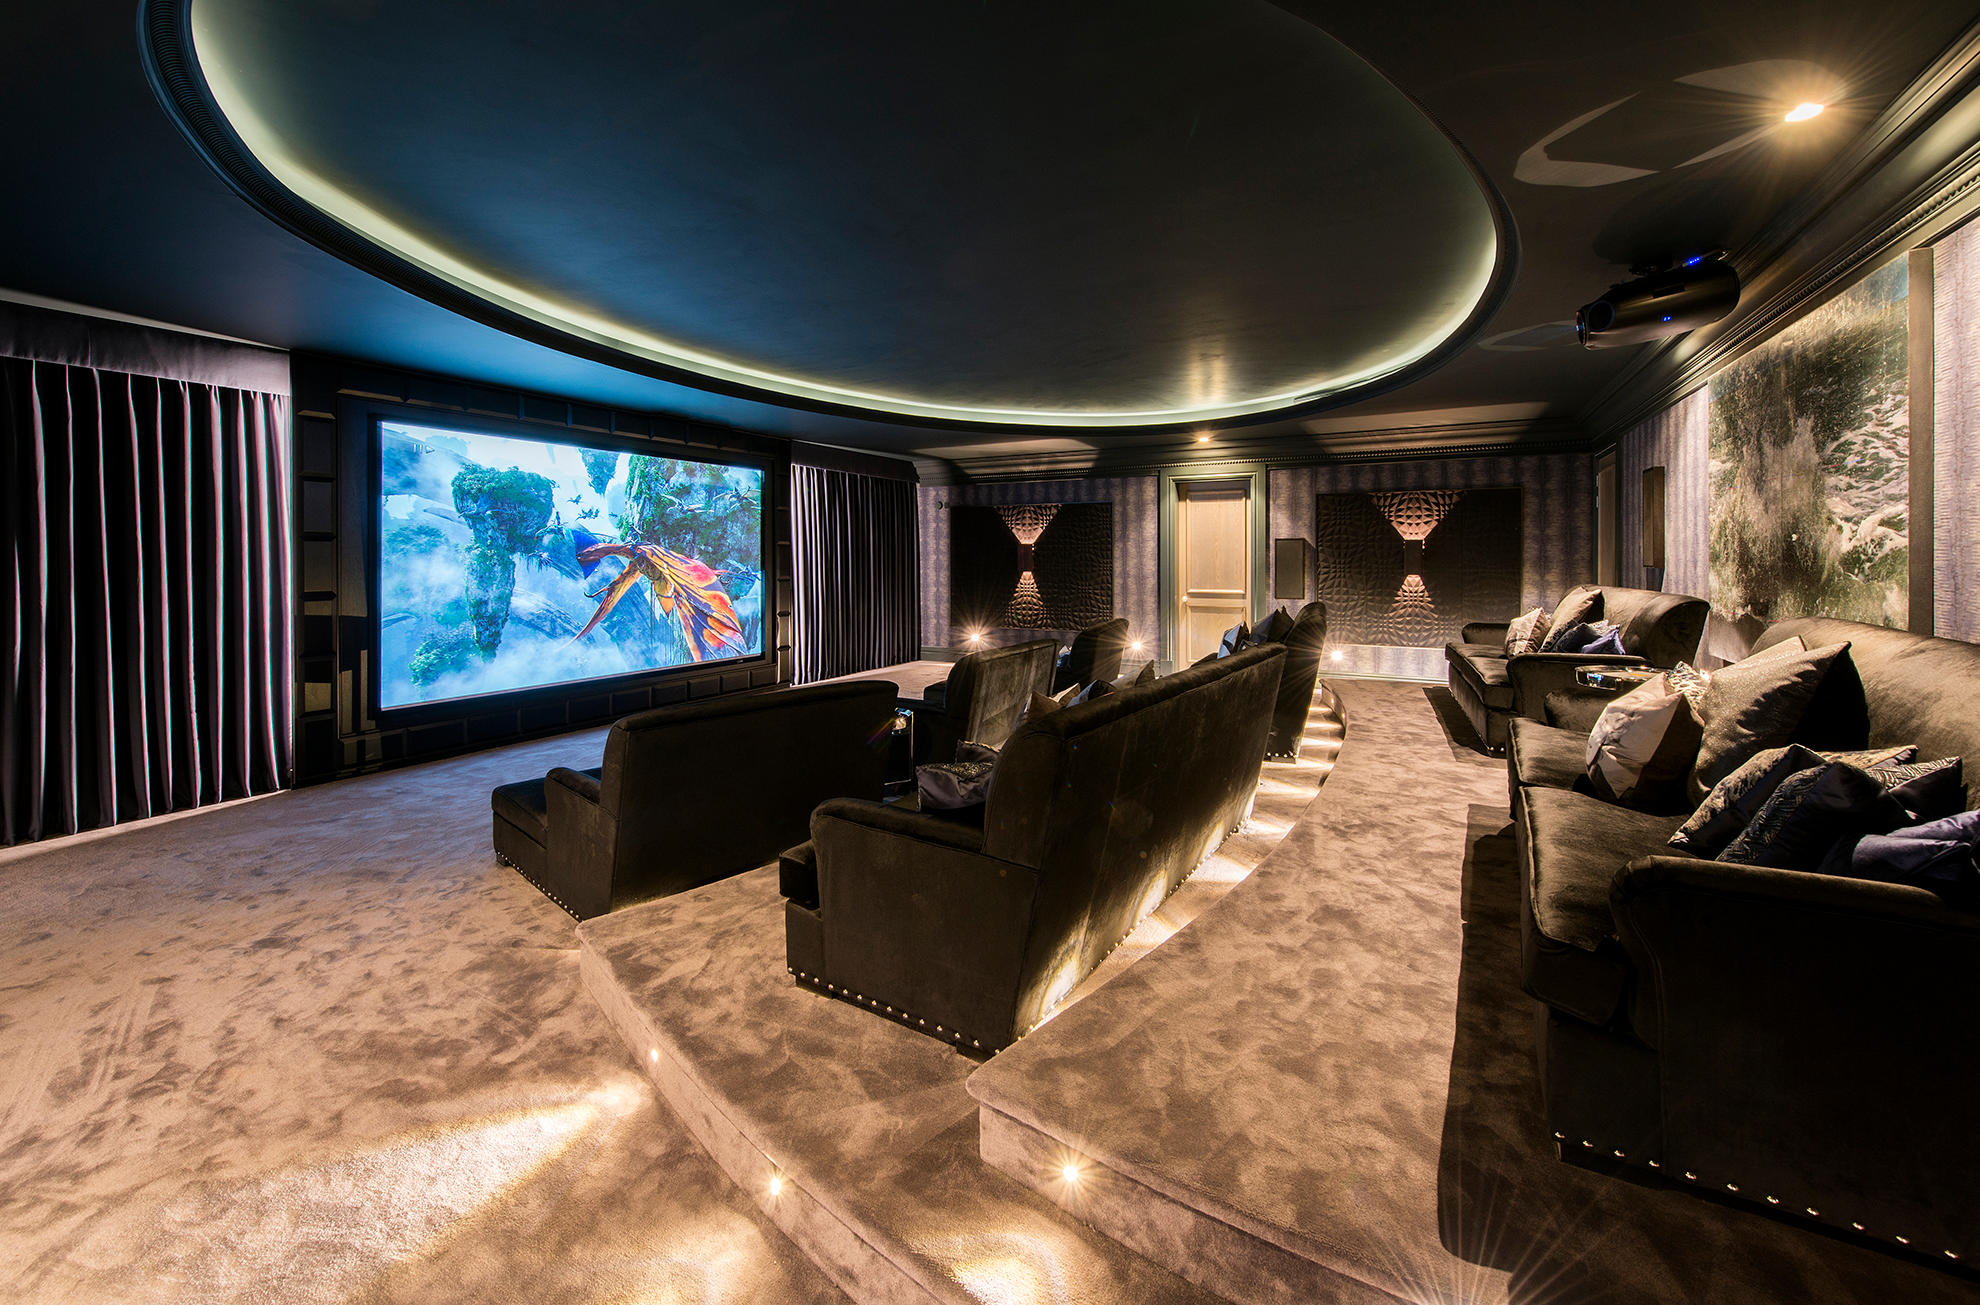 Stylish design and performance to match this stunning cinema sold the property for this luxury devel Cinemas and Control Ltd Ascot 01344 944300